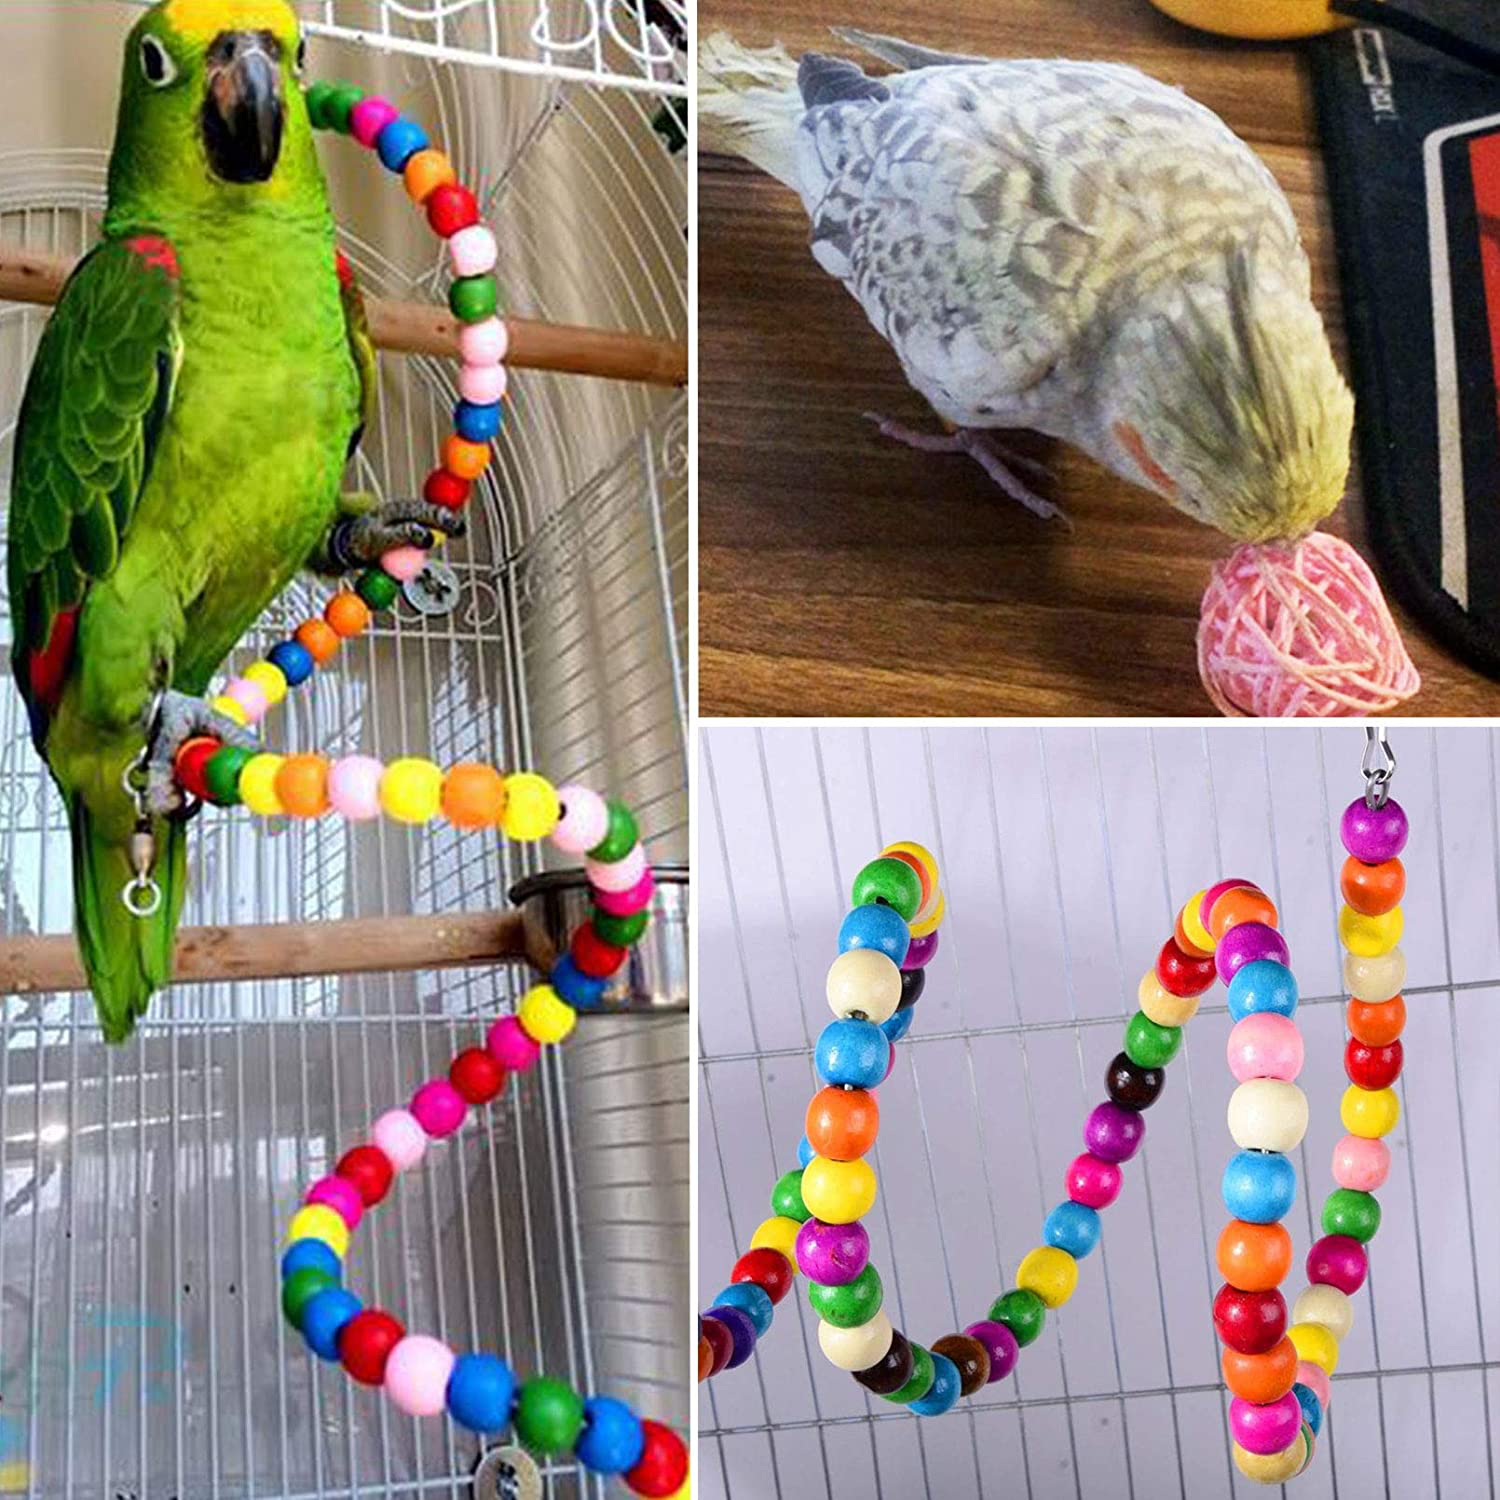 Kathson 17 Packs Bird Toys Parrot Swing Chewing Toys, Hanging Bell Birds Cage Toys Colorful Toy for Small Parakeets, Conures, Cockatiels, Macaws, Finches, Love Birds